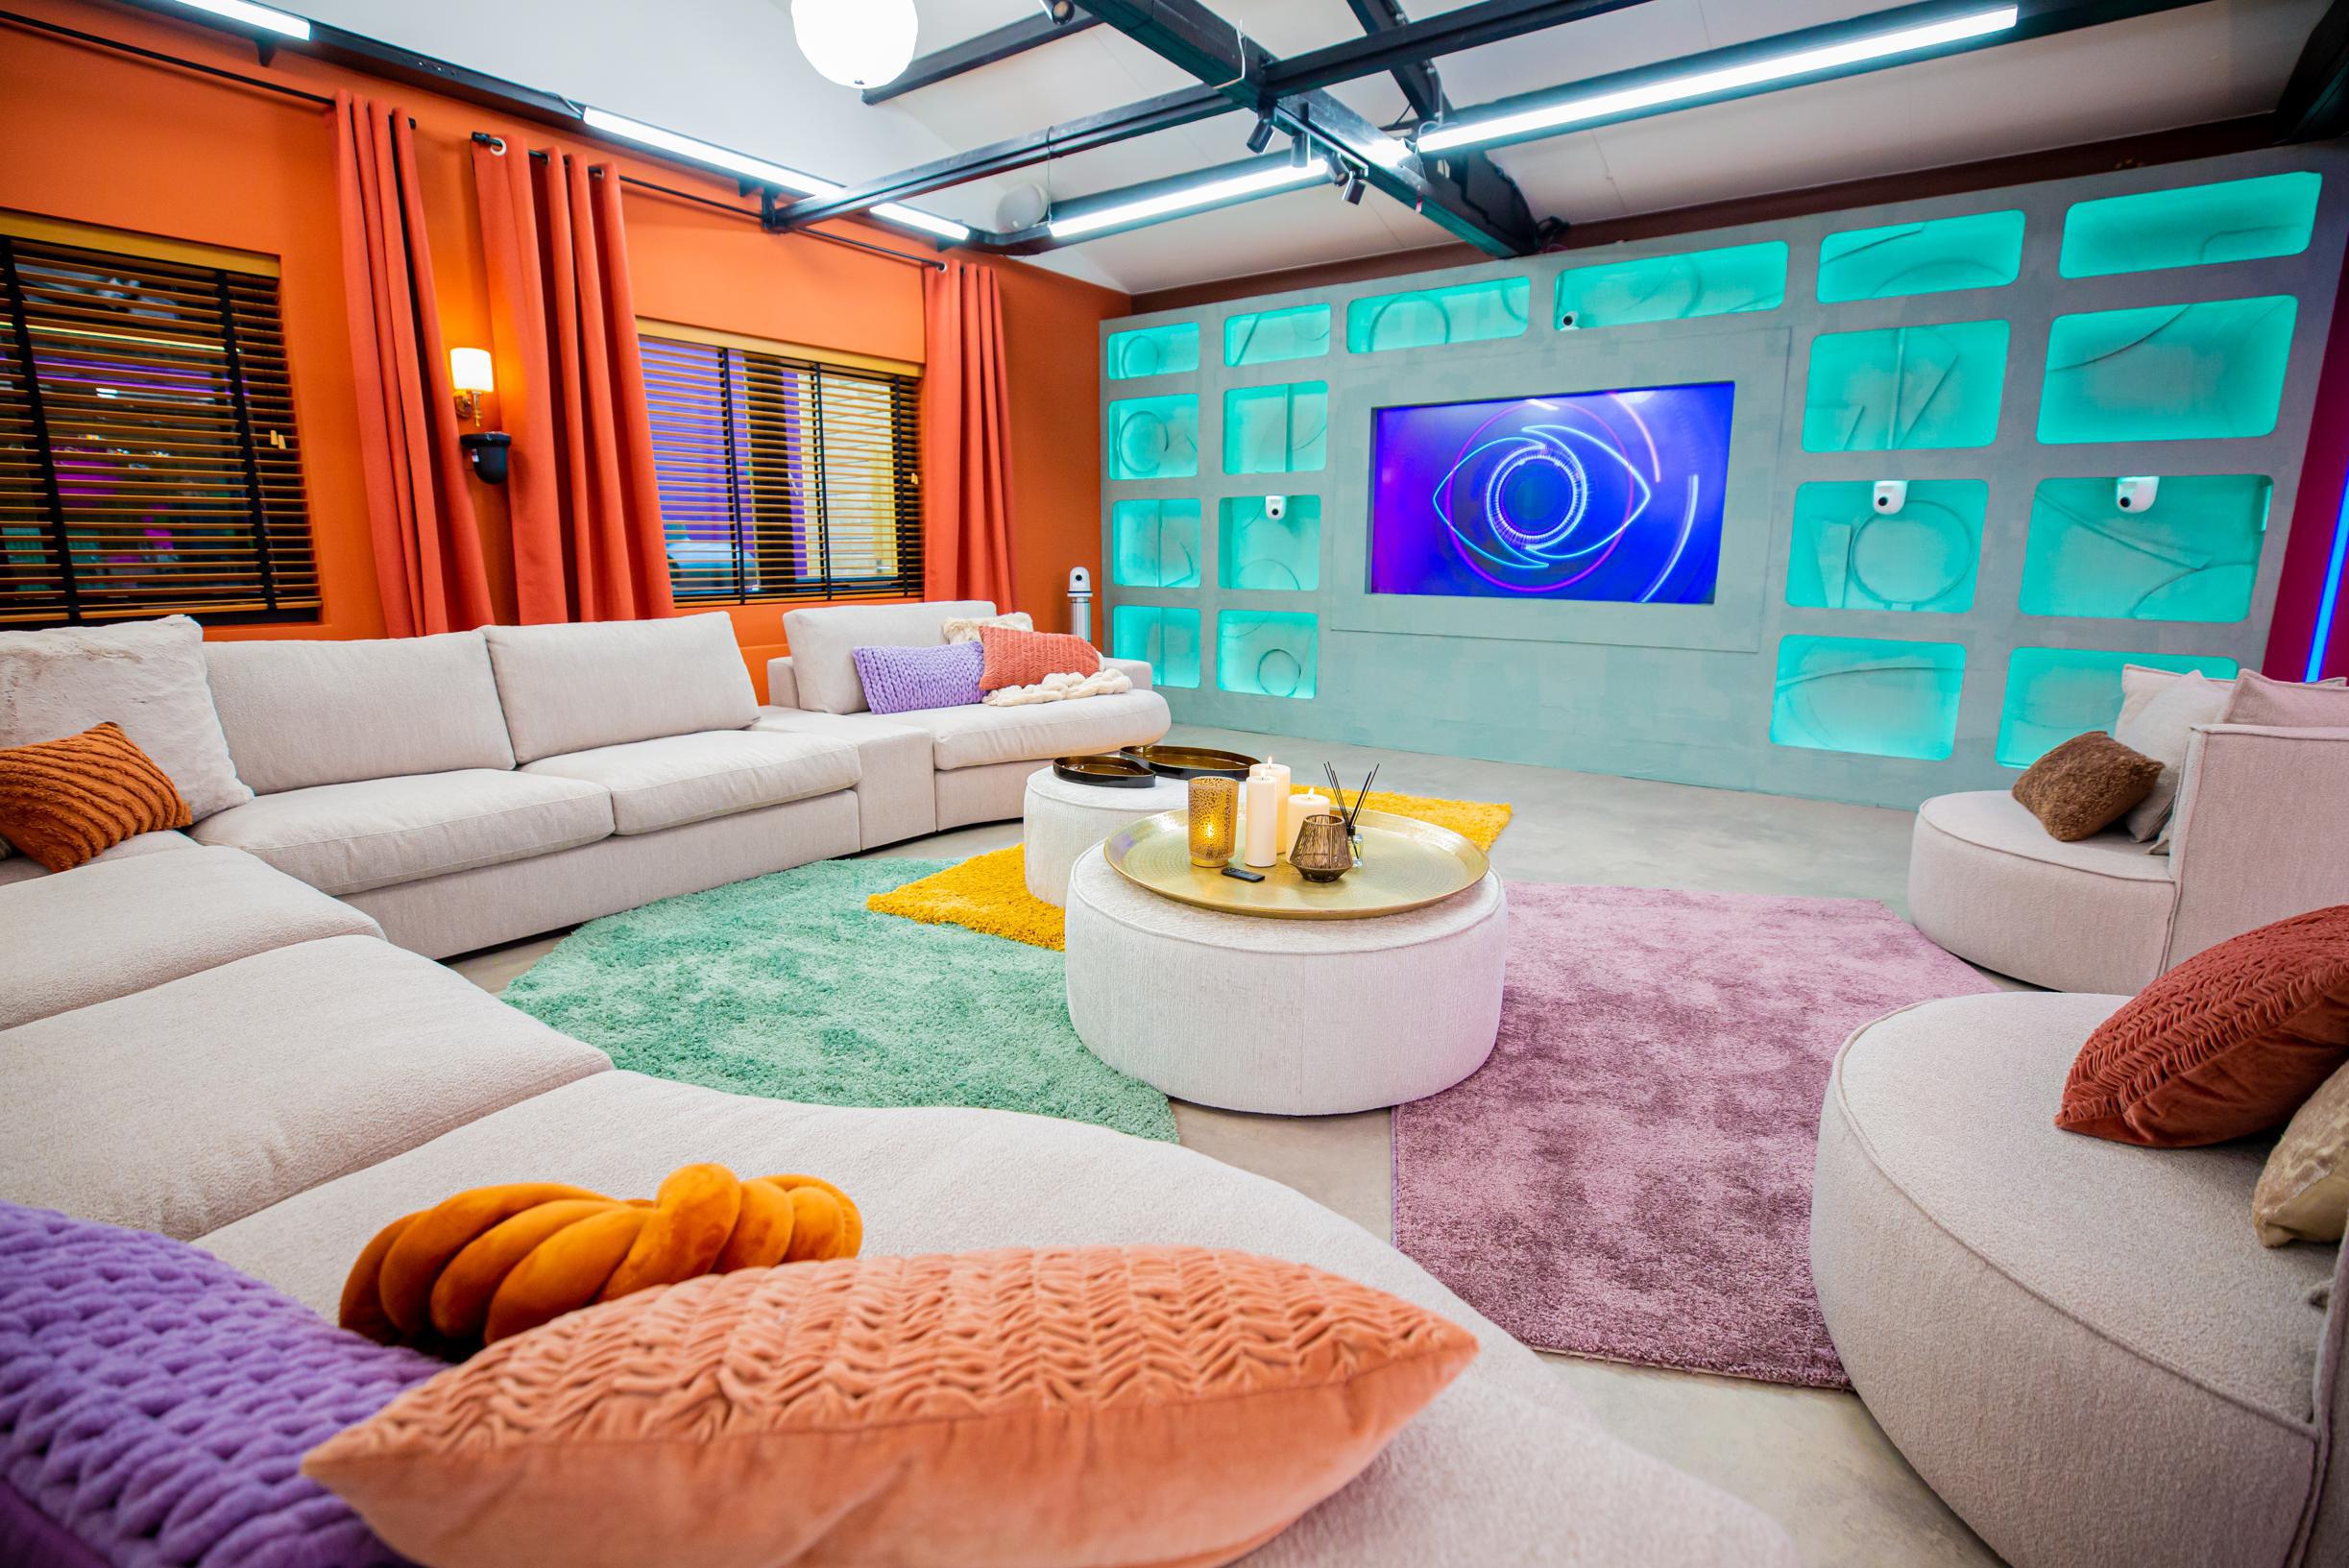 This is what the new "Big Brother" house looks like